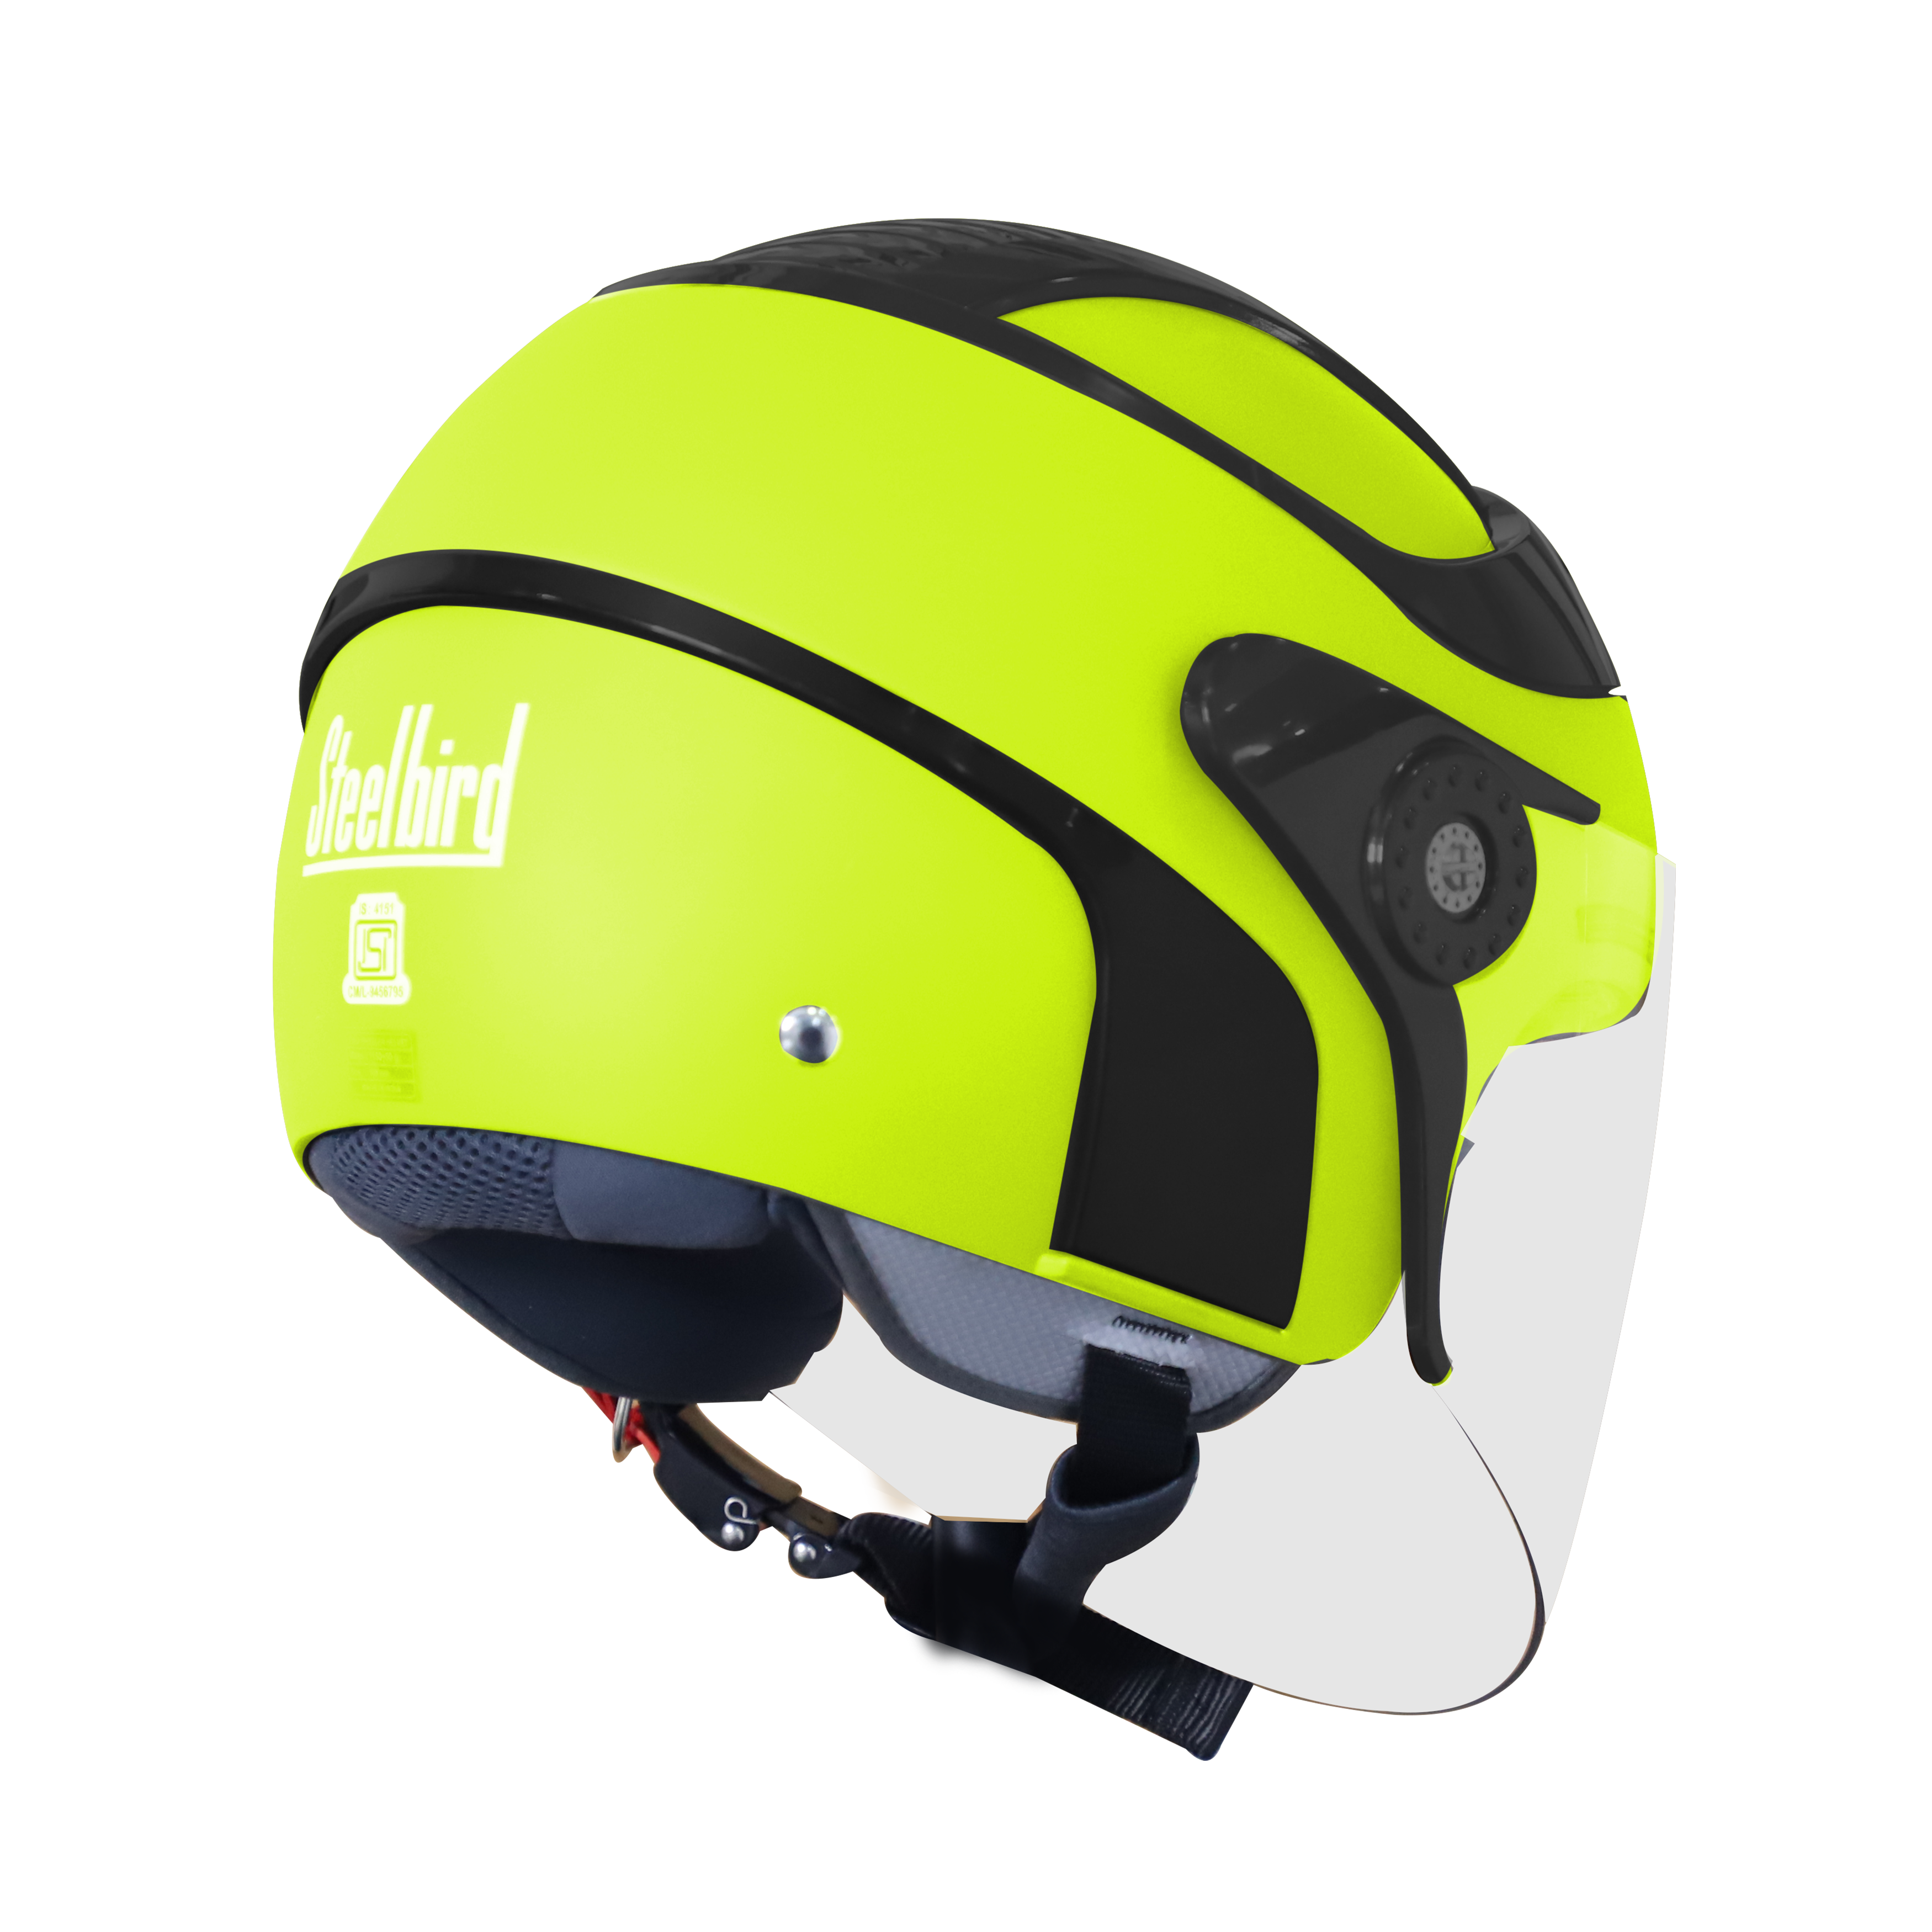 SB-29 AER GLOSSY FLUO NEON WITH BLACK 